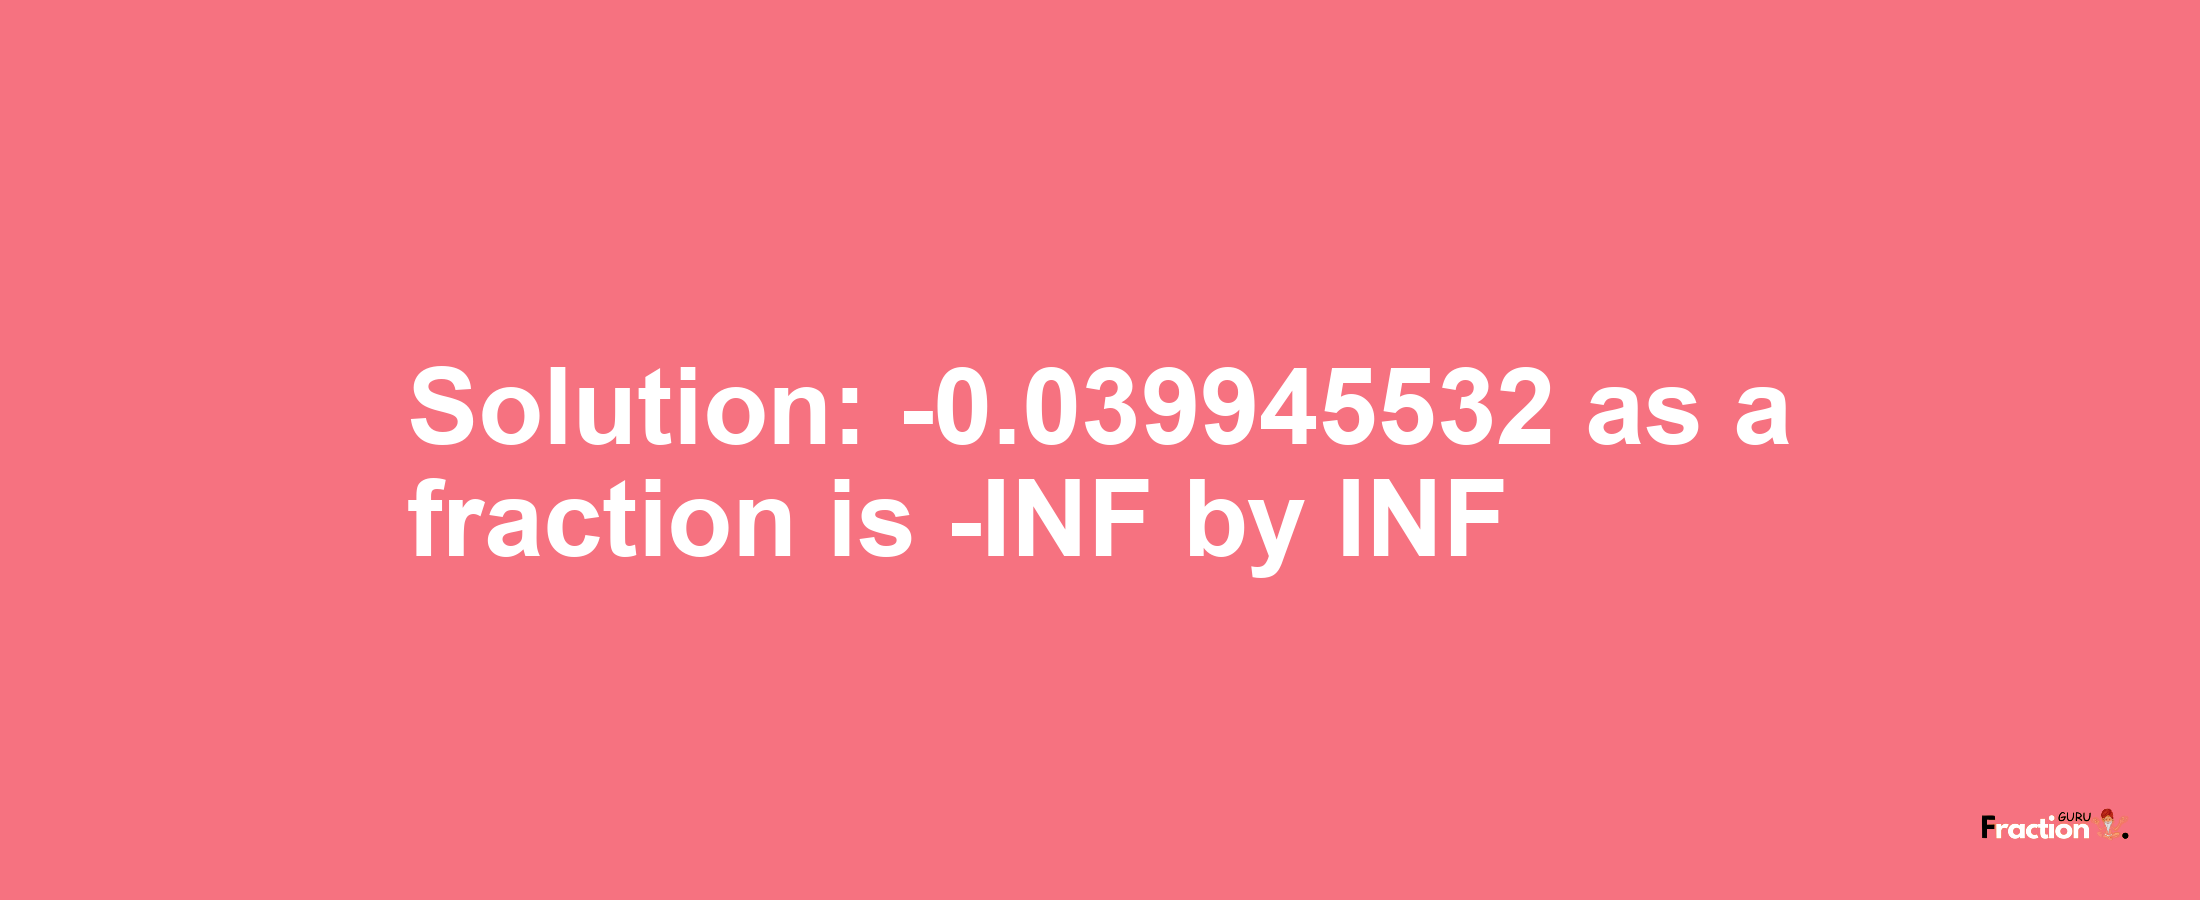 Solution:-0.039945532 as a fraction is -INF/INF